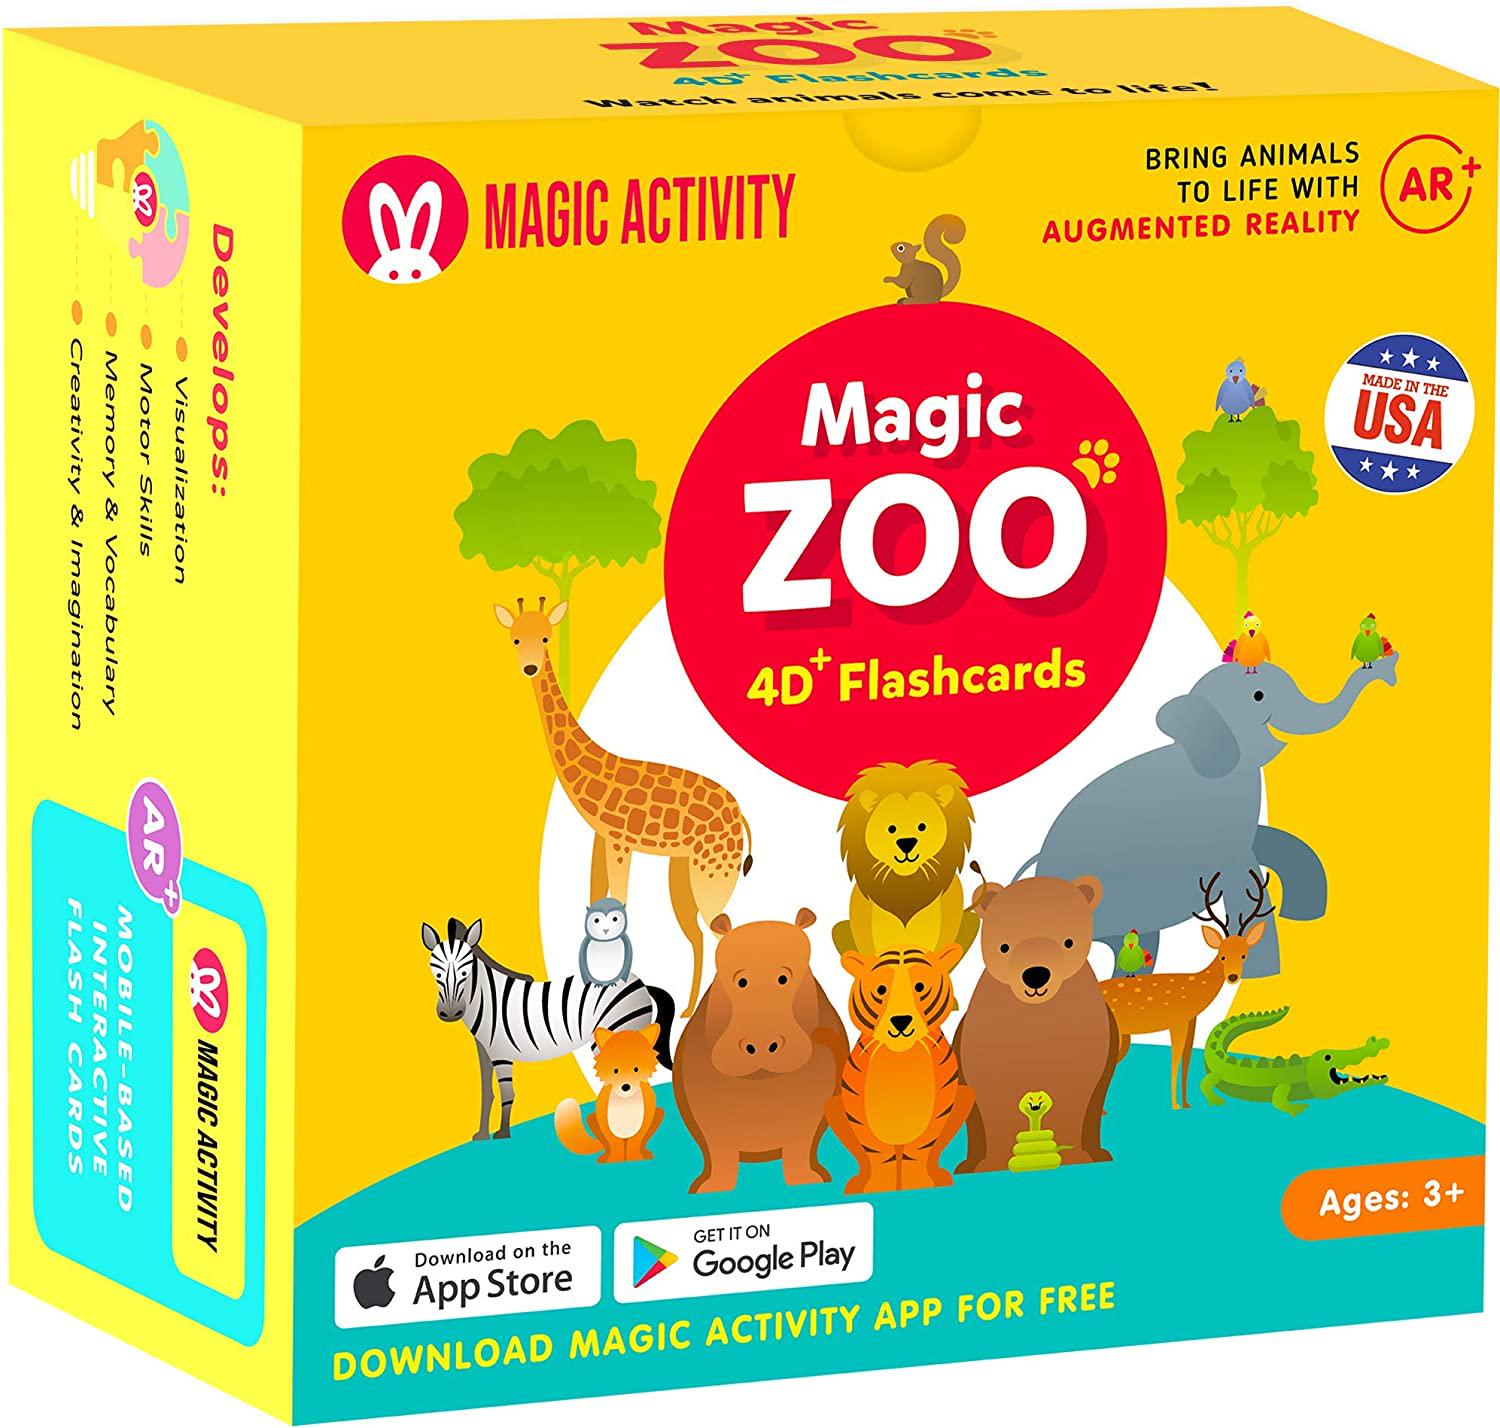 Magic Activity, Magic Zoo 4D Flash Cards for Kids: Animals Come Alive (See Them Walk, Talk, Run and Eat) with Augmented Reality - 26 Interactive Learning Flash Cards (AR App Included)